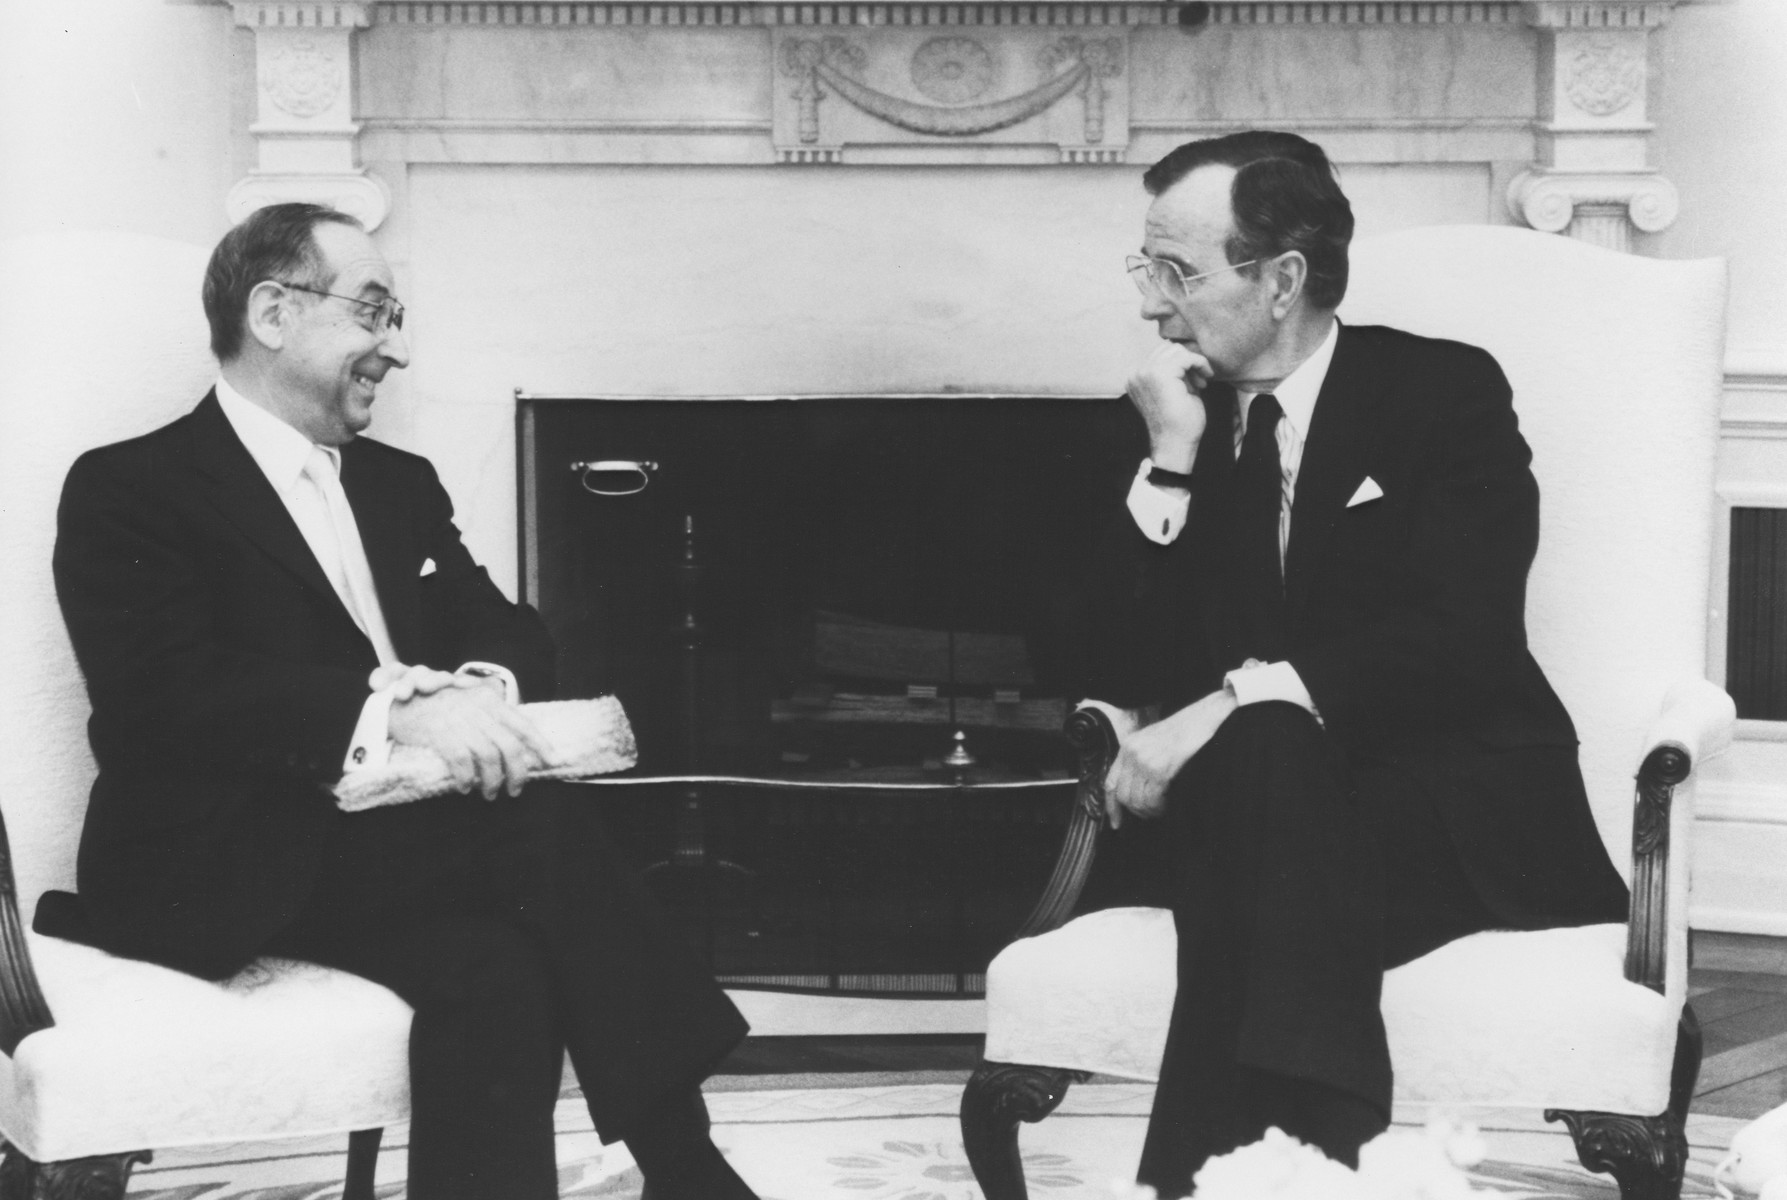 US Holocaust Memorial Council Chairman Harvey Meyerhoff in conversation with President George H.W. Bush at the White House.

Members of the U.S. Holocaust Memorial Council met with President George Bush on the occasion of the 1989 Days of Remembrance for the Victims of the Holocaust commemoration.